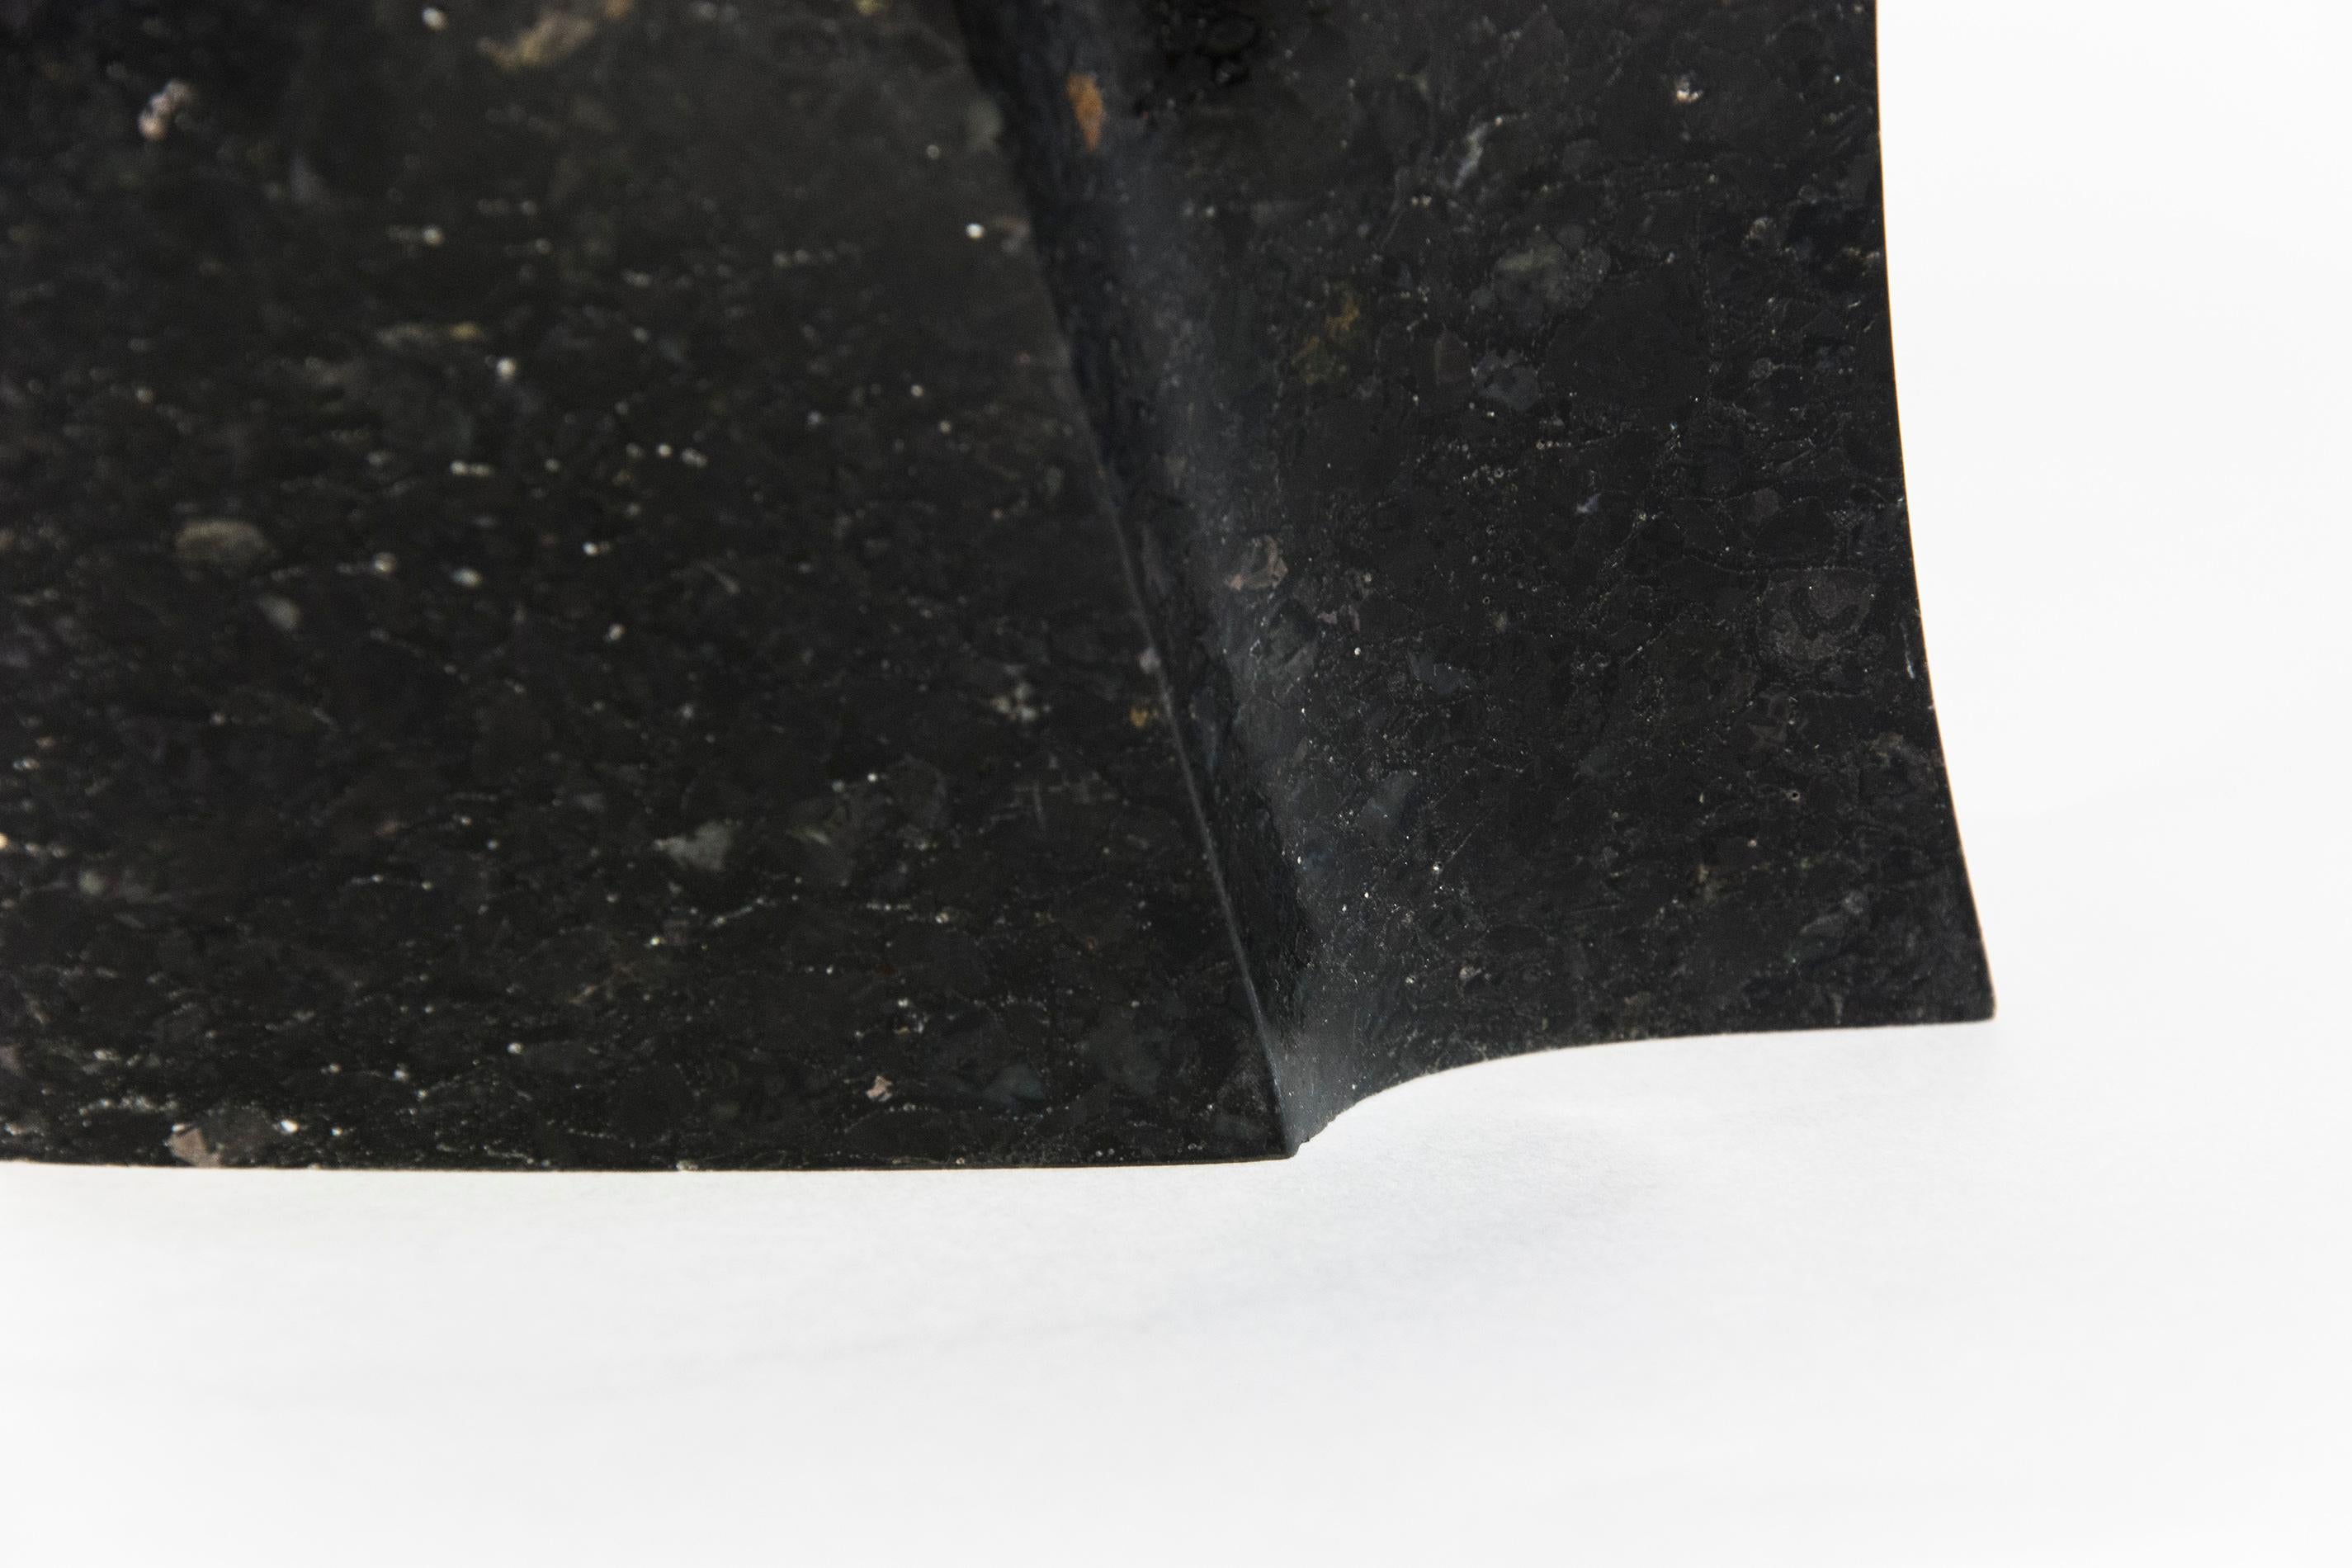 Embrace 4/50 - dark, smooth, polished, abstract, black granite sculpture For Sale 2